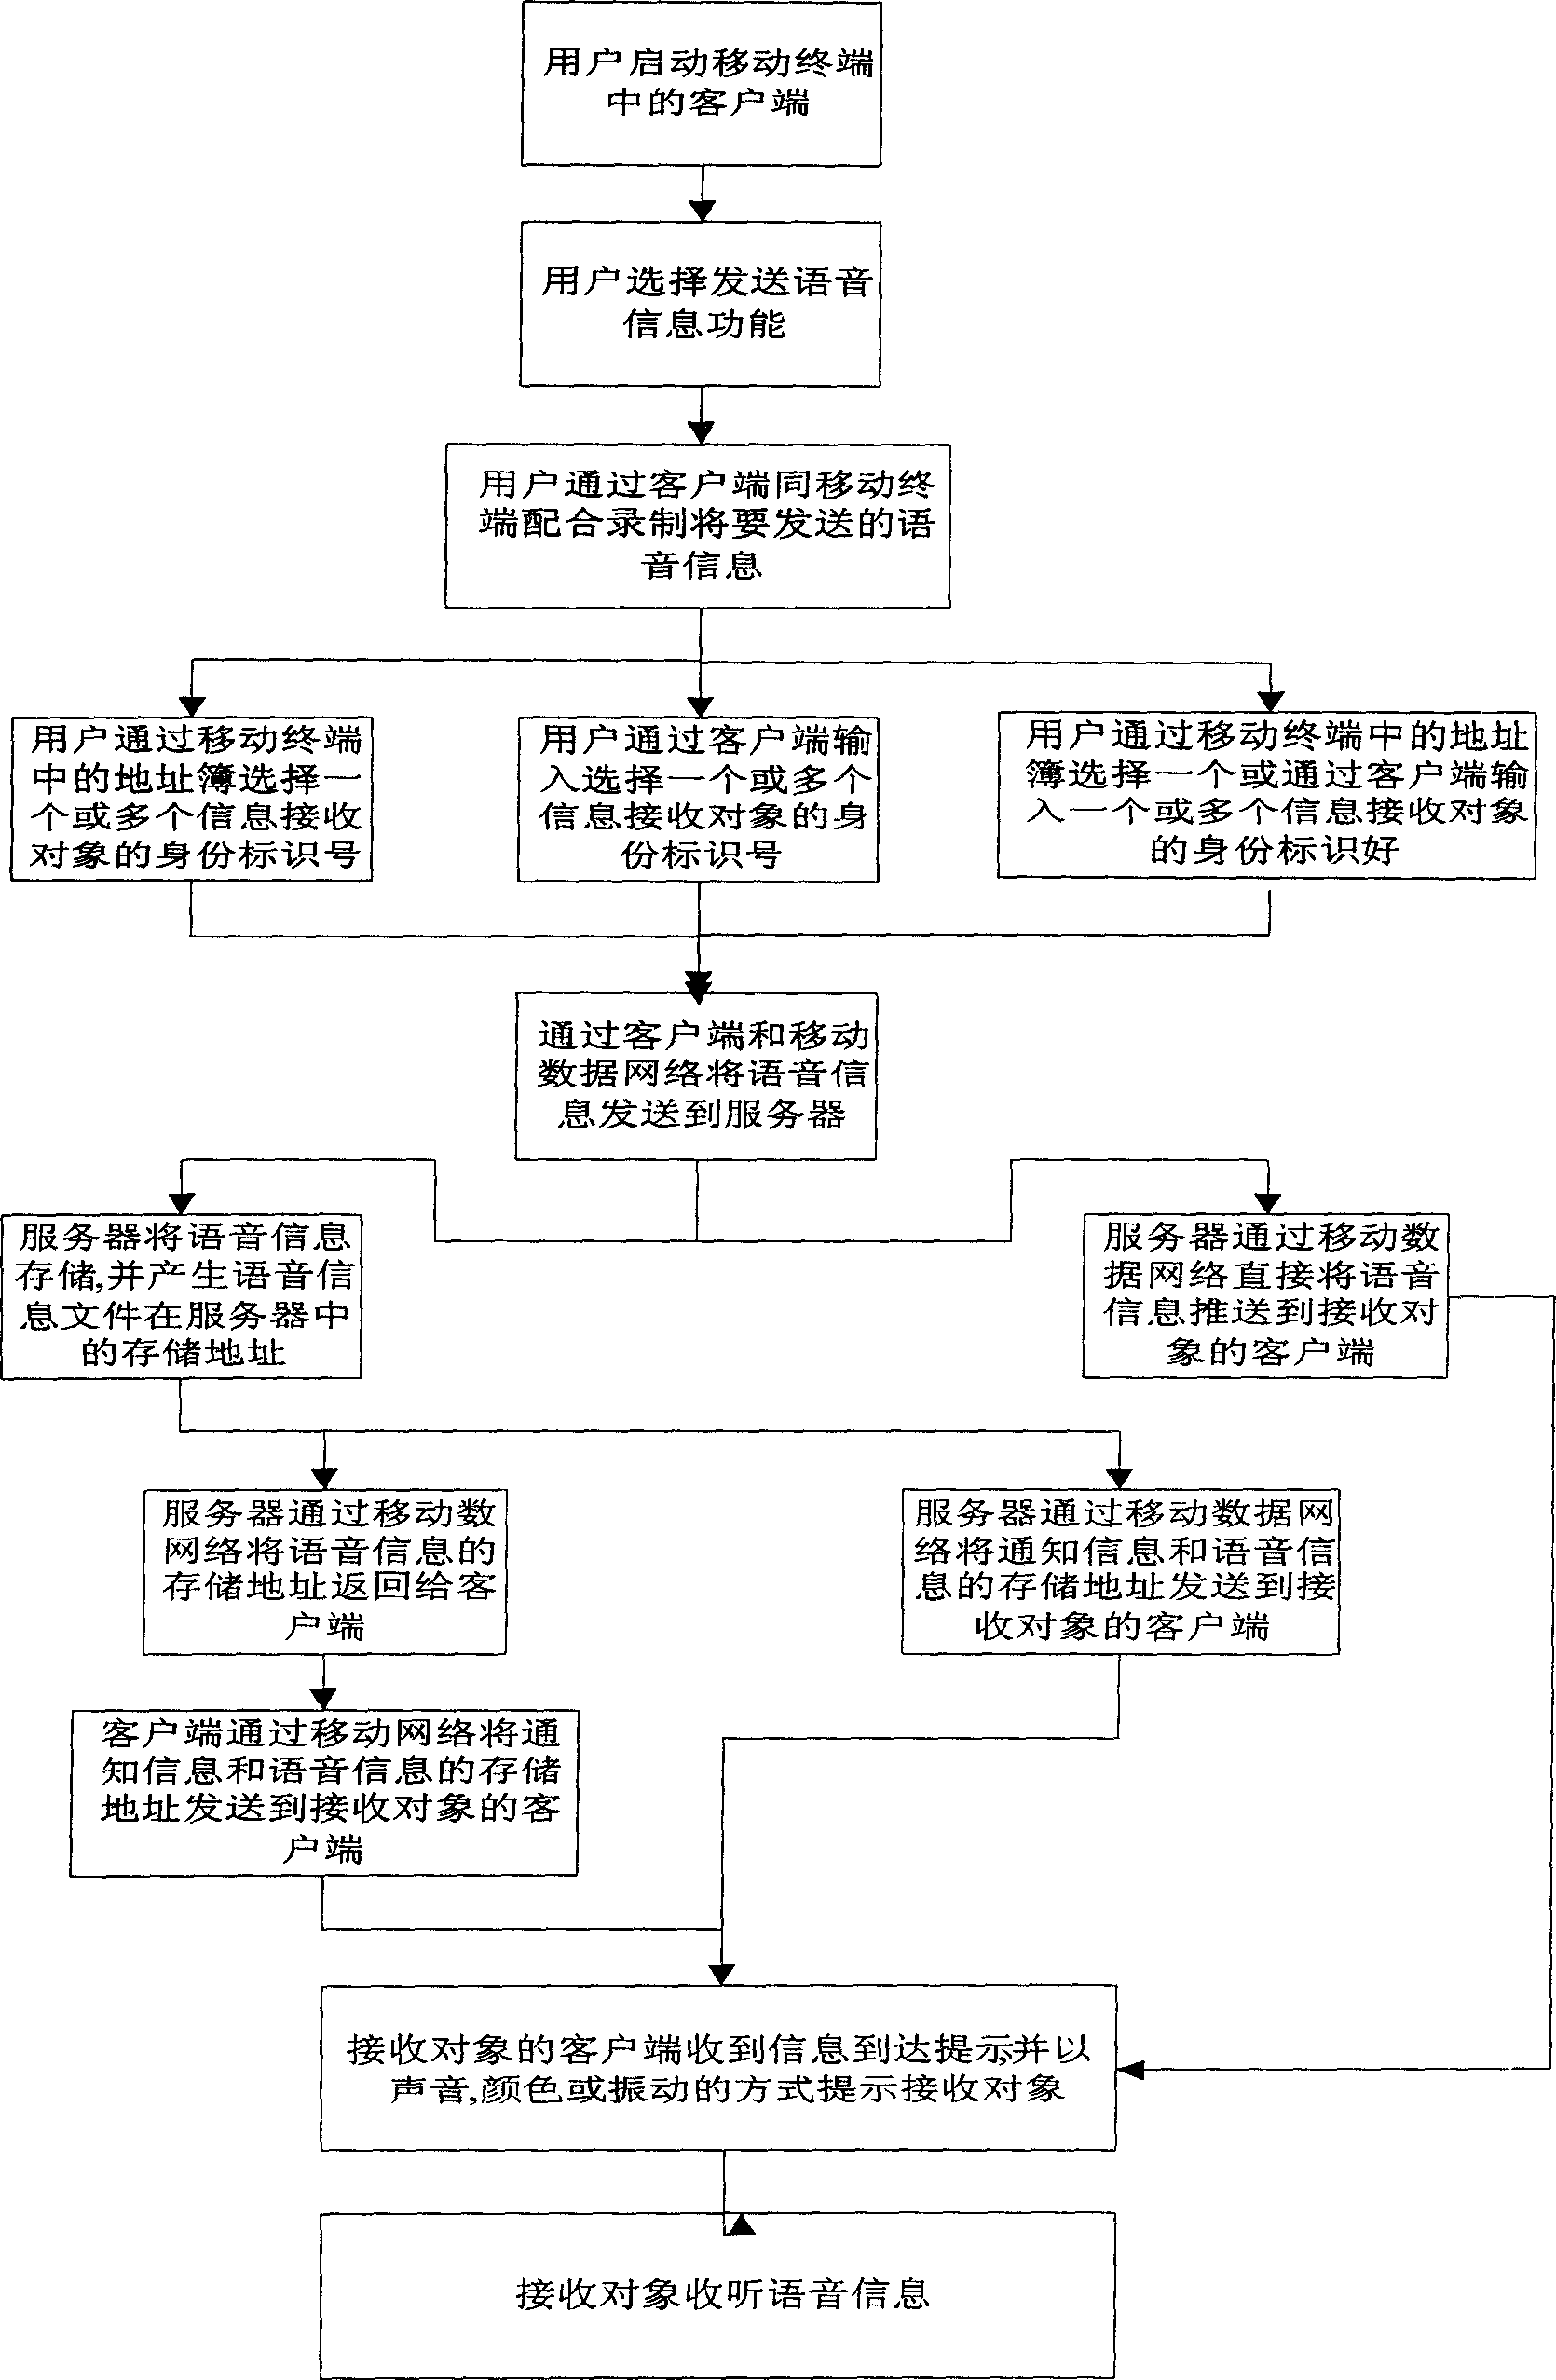 Method for transmitting and receiving voice information on mobile terminal